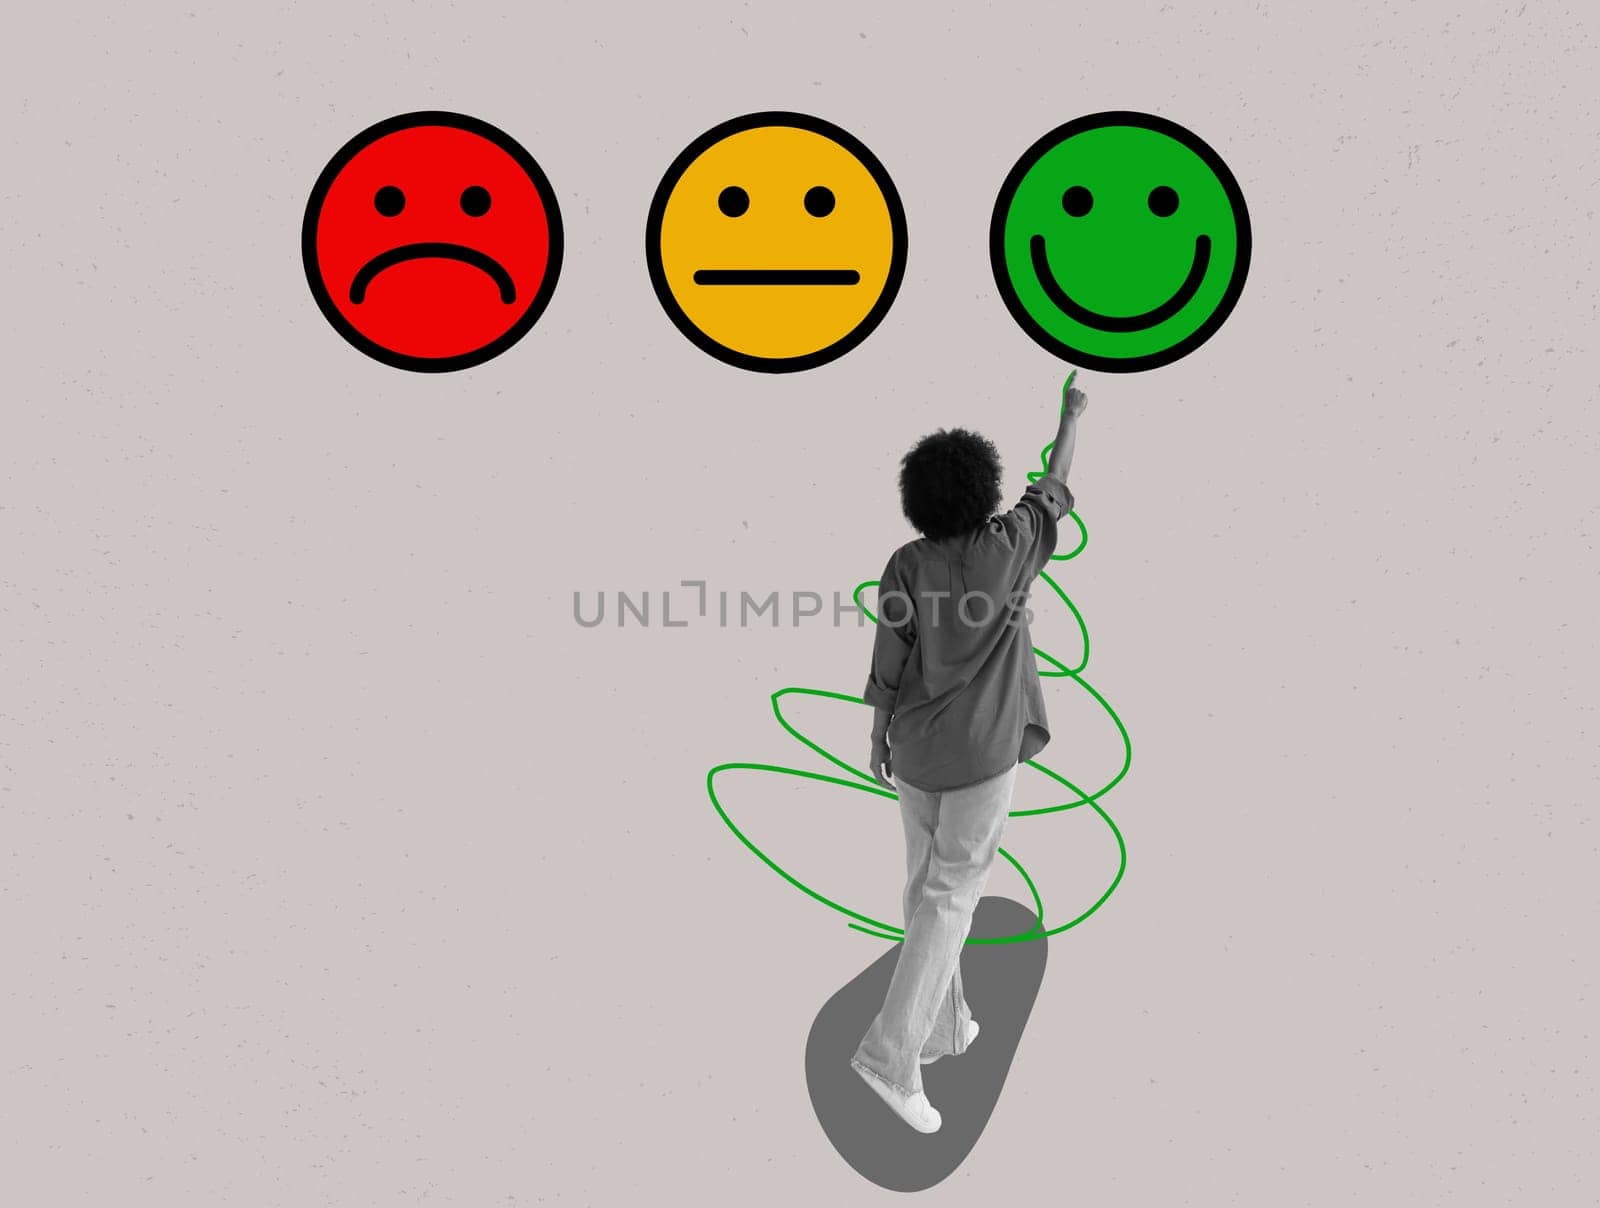 Collage about customer evaluation. The girl points to a happy emoticon.